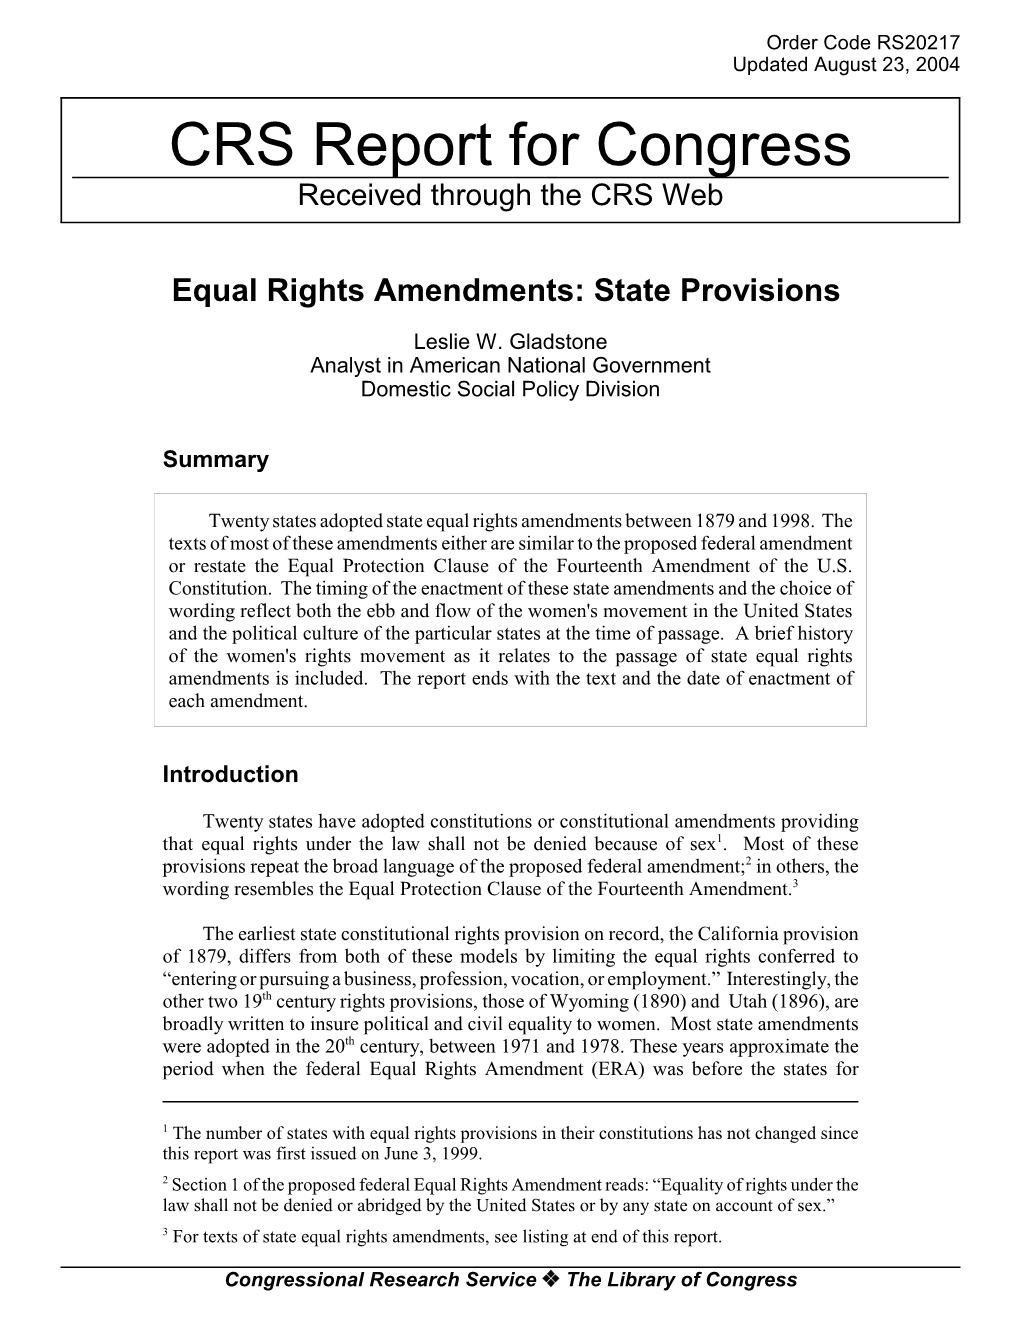 Equal Rights Amendments: State Provisions